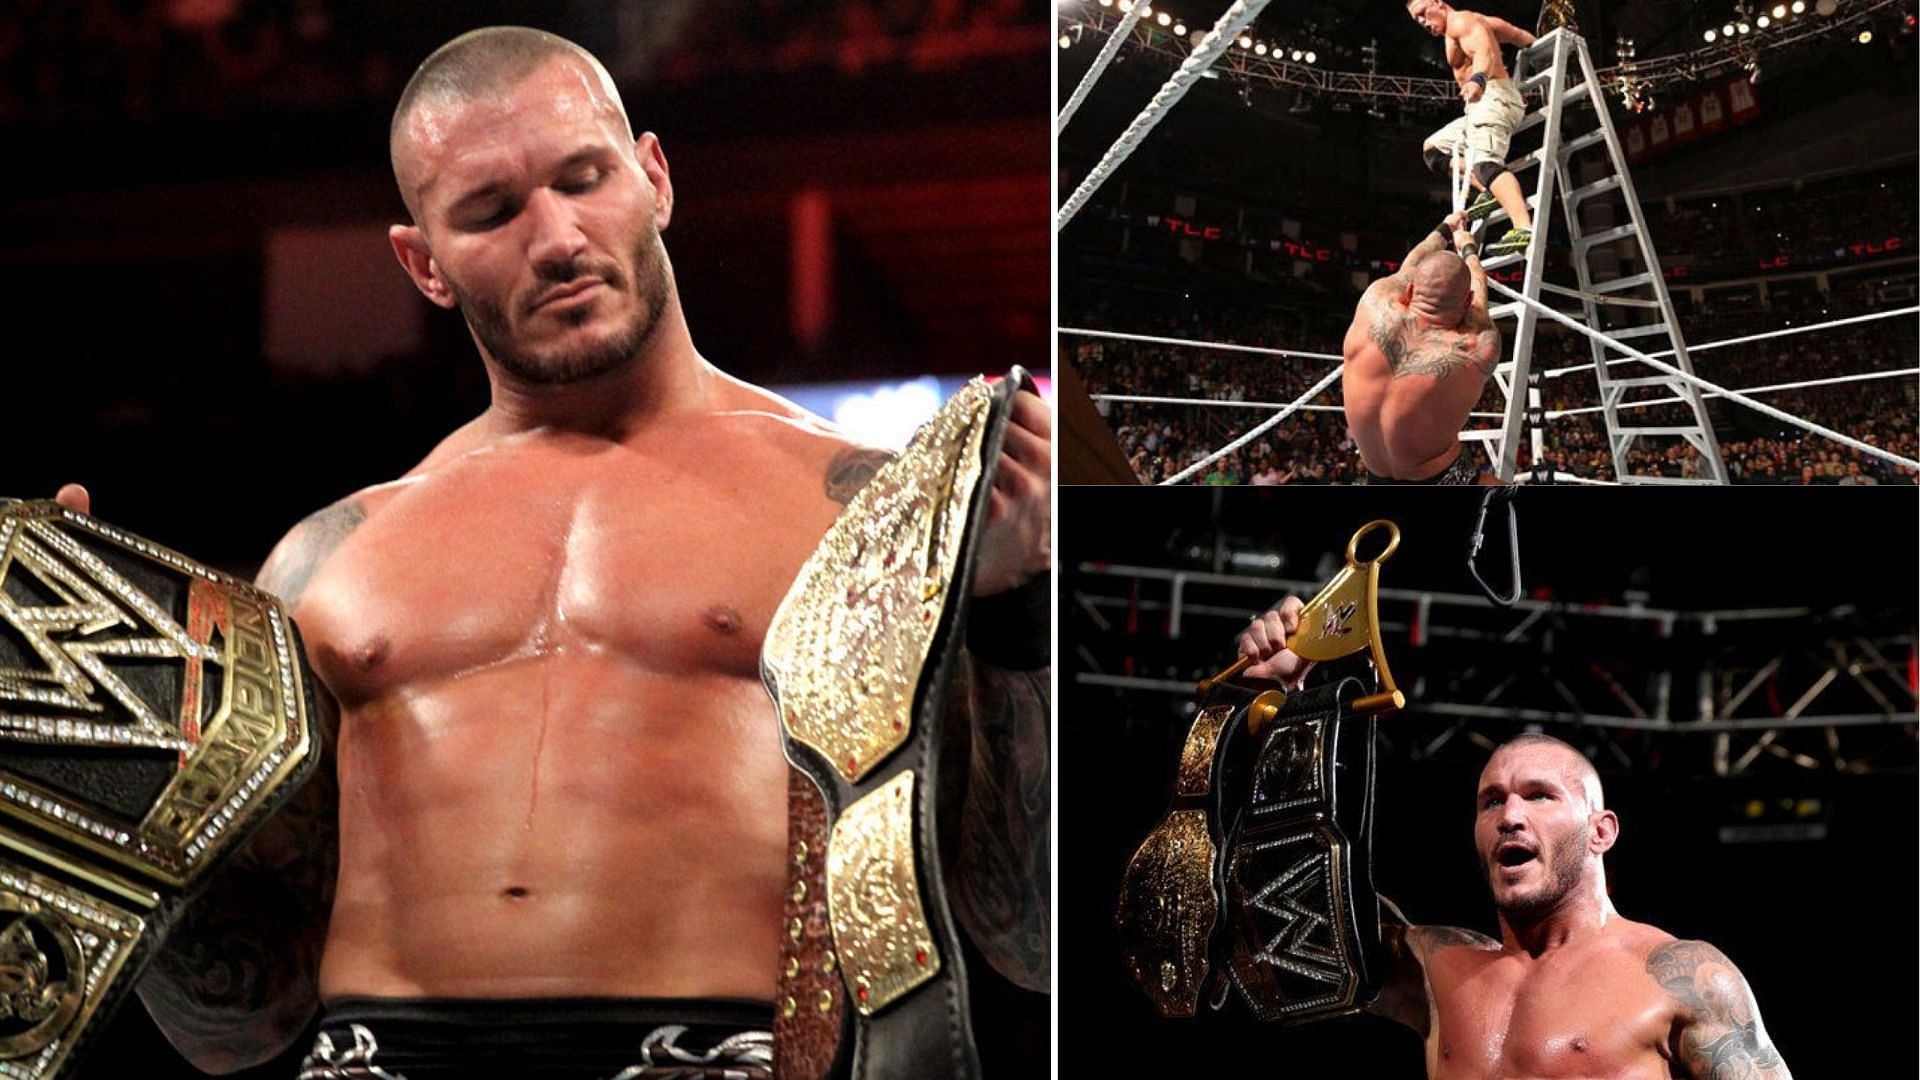 Orton became the Undisputed WWE World Heavyweight Champion at TLC 2013.